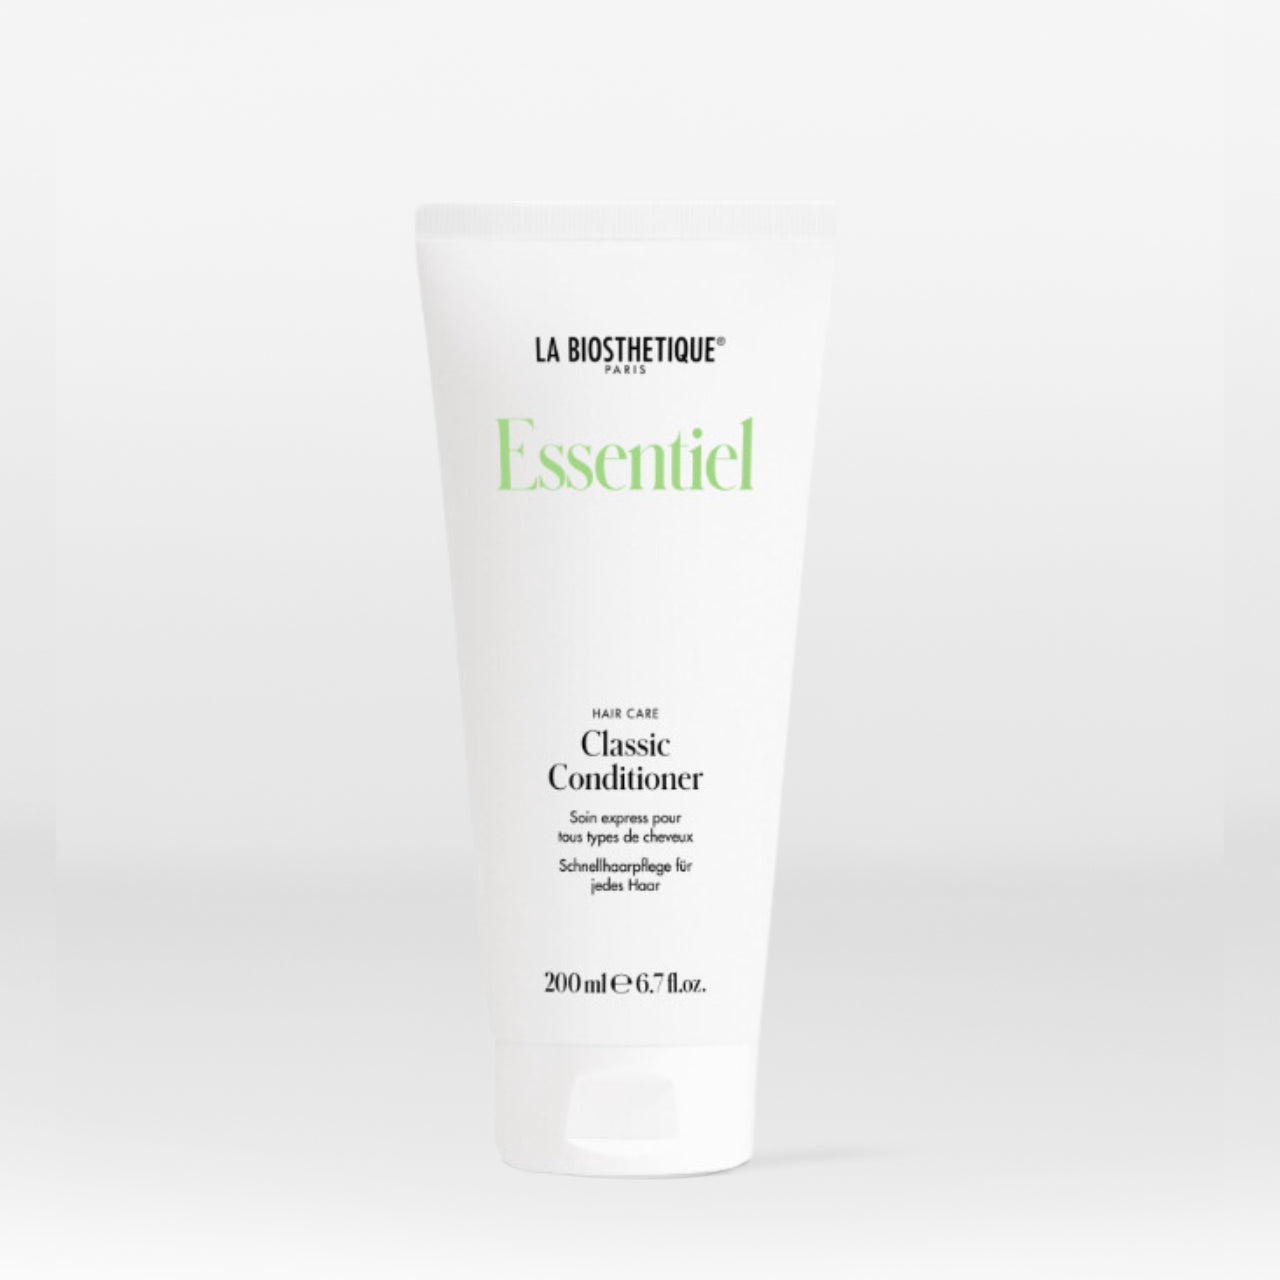 La Biosthetique's Essentiel Classic Conditioner nourishes and balances out structural deficits in the hair. 